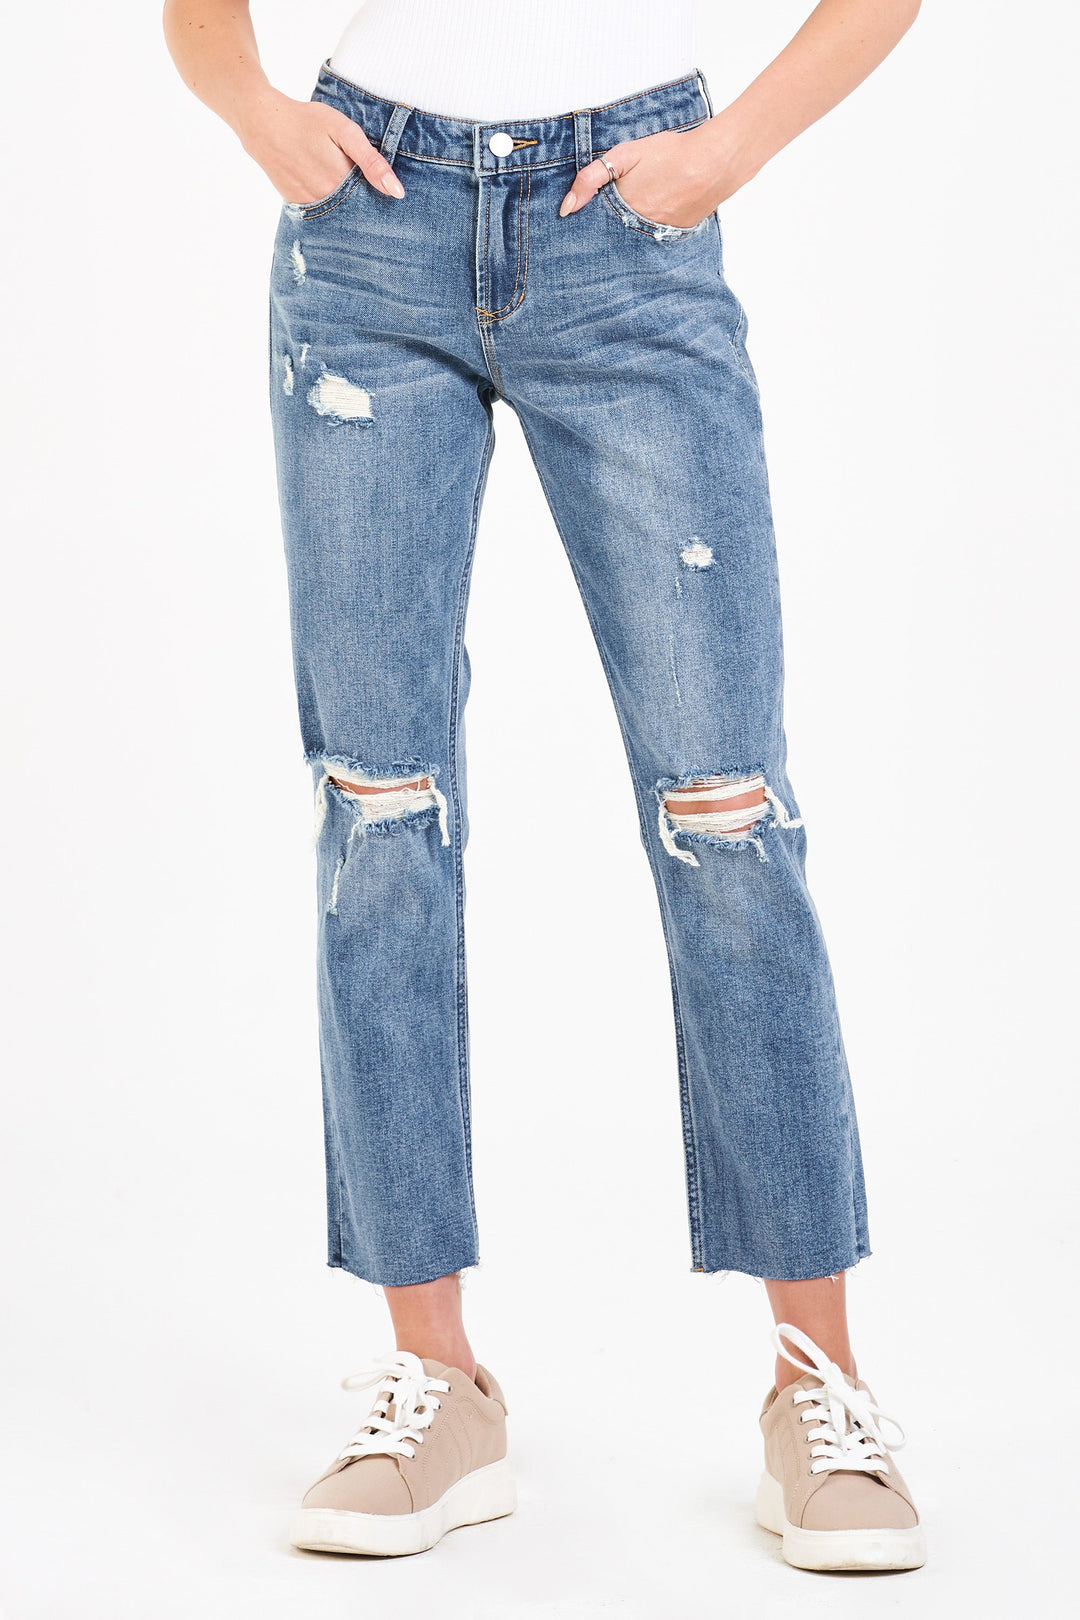 image of a female model wearing a BLAIRE HIGH RISE ANKLE SLIM STRAIGHT LEG JEANS CENTRAL AVENUE JEANS